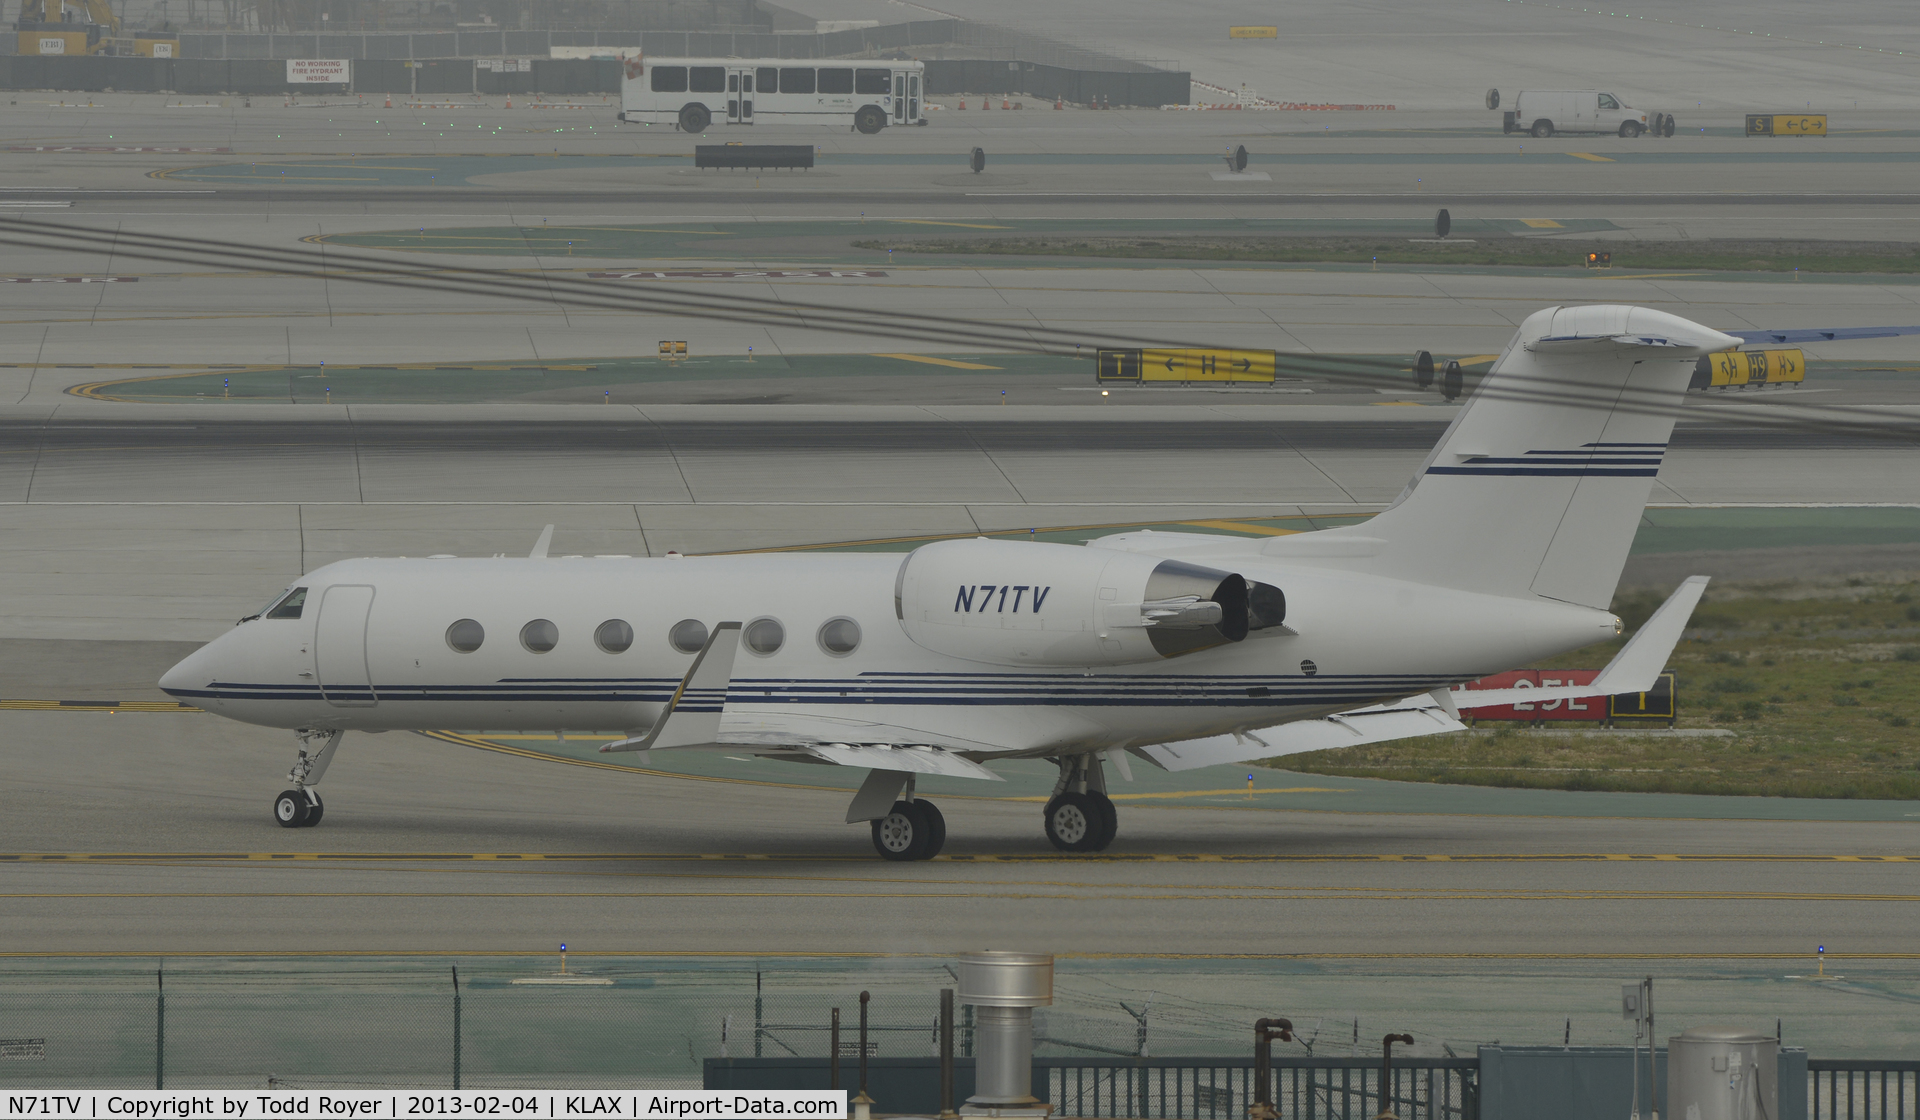 N71TV, 2000 Gulfstream Aerospace G-IV C/N 1430, Taxiing for departure at LAX